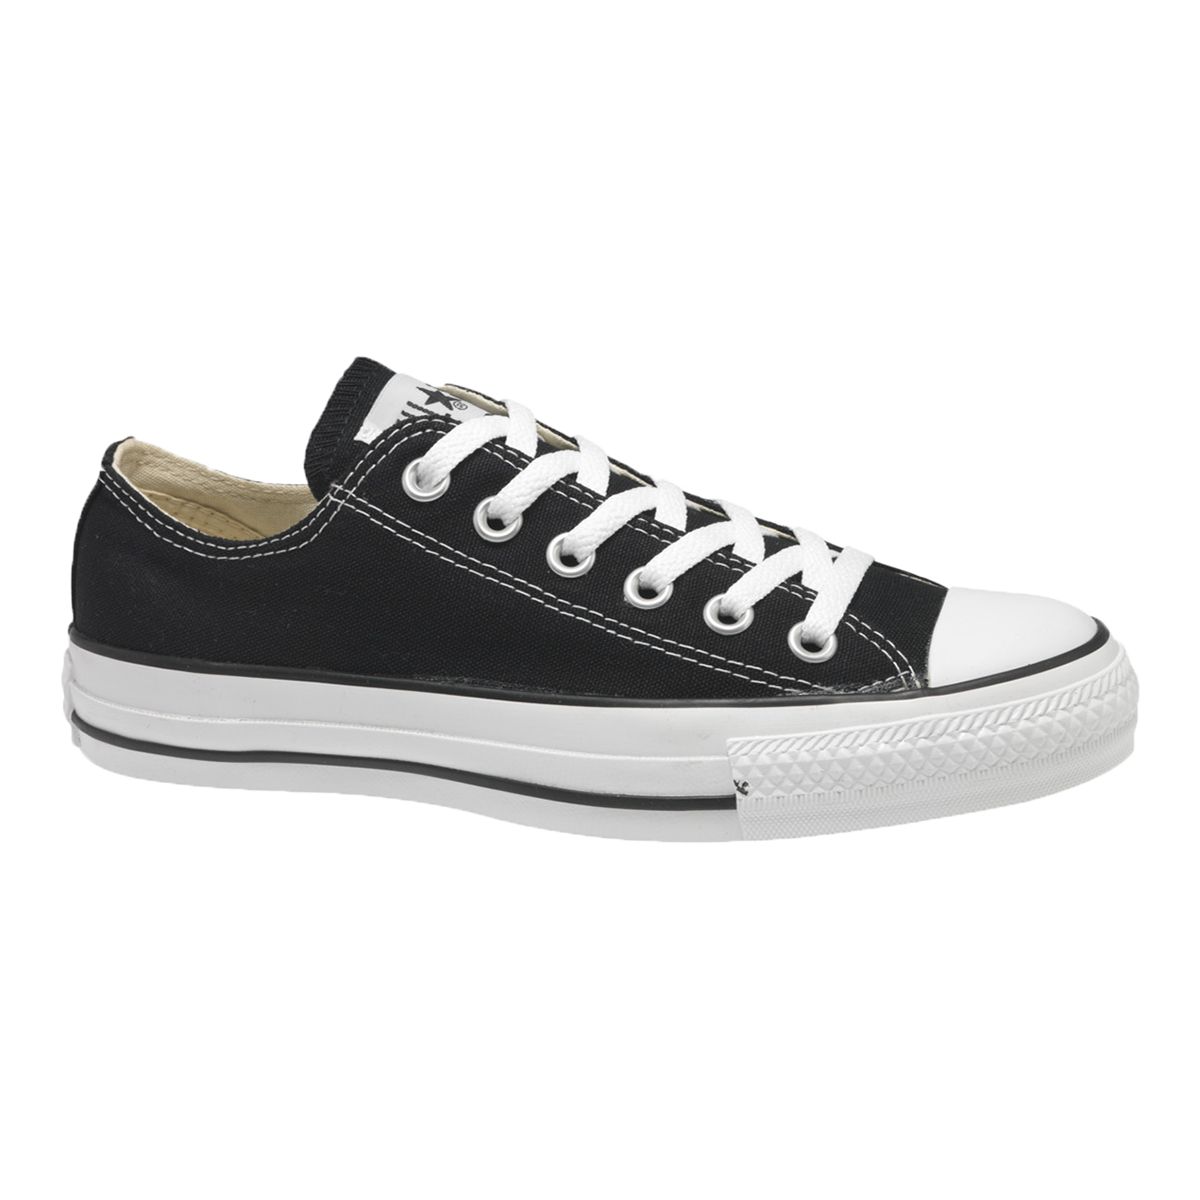 Image of Converse Women's Chuck Taylor All Star Ox Shoes Sneakers Canvas